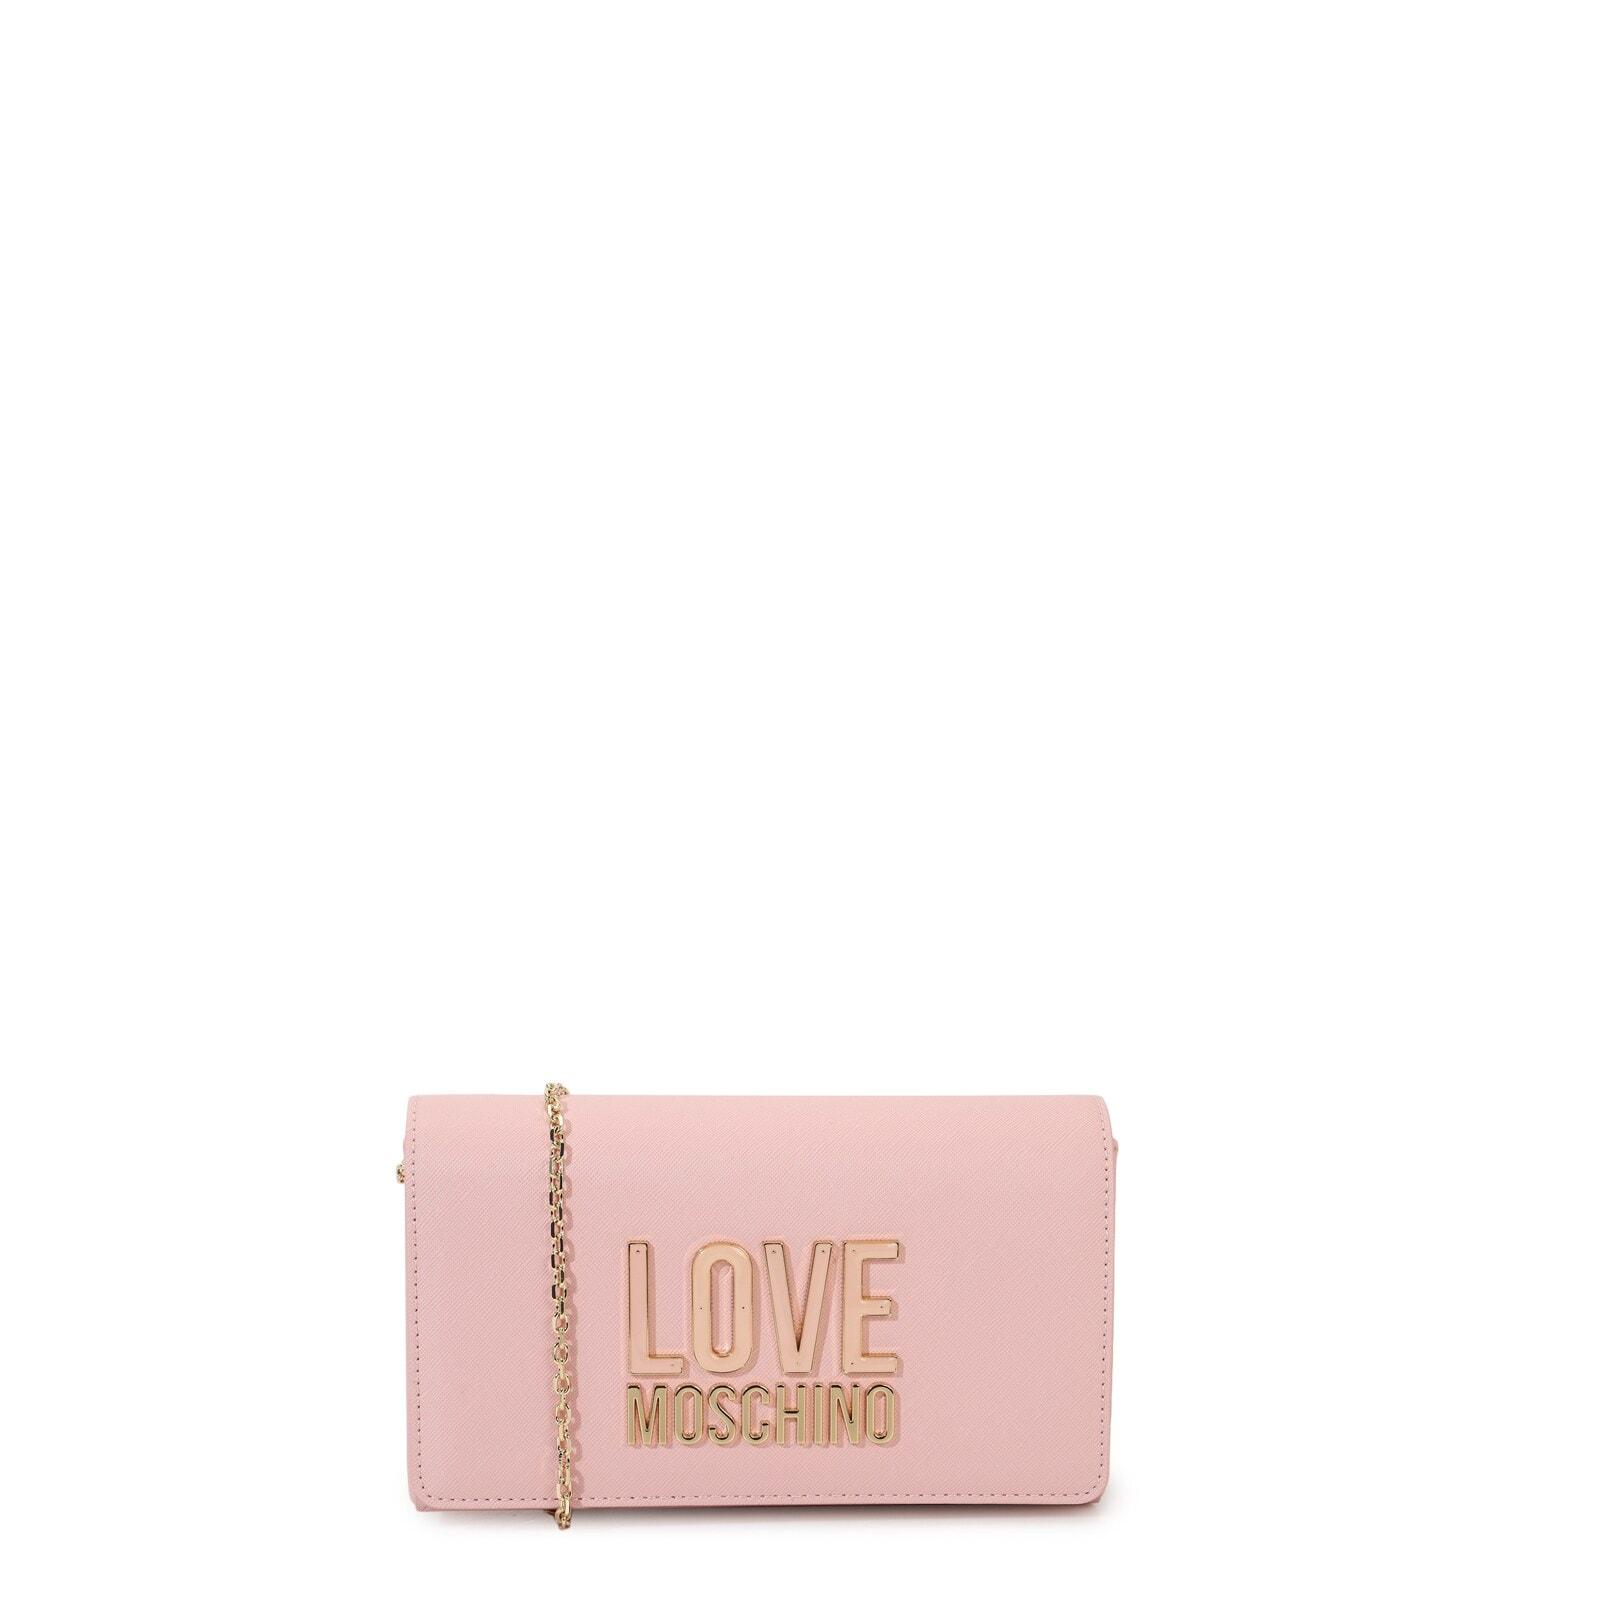 women-pink-solid-bold-branding-crossbody-bag-with-chain-strap